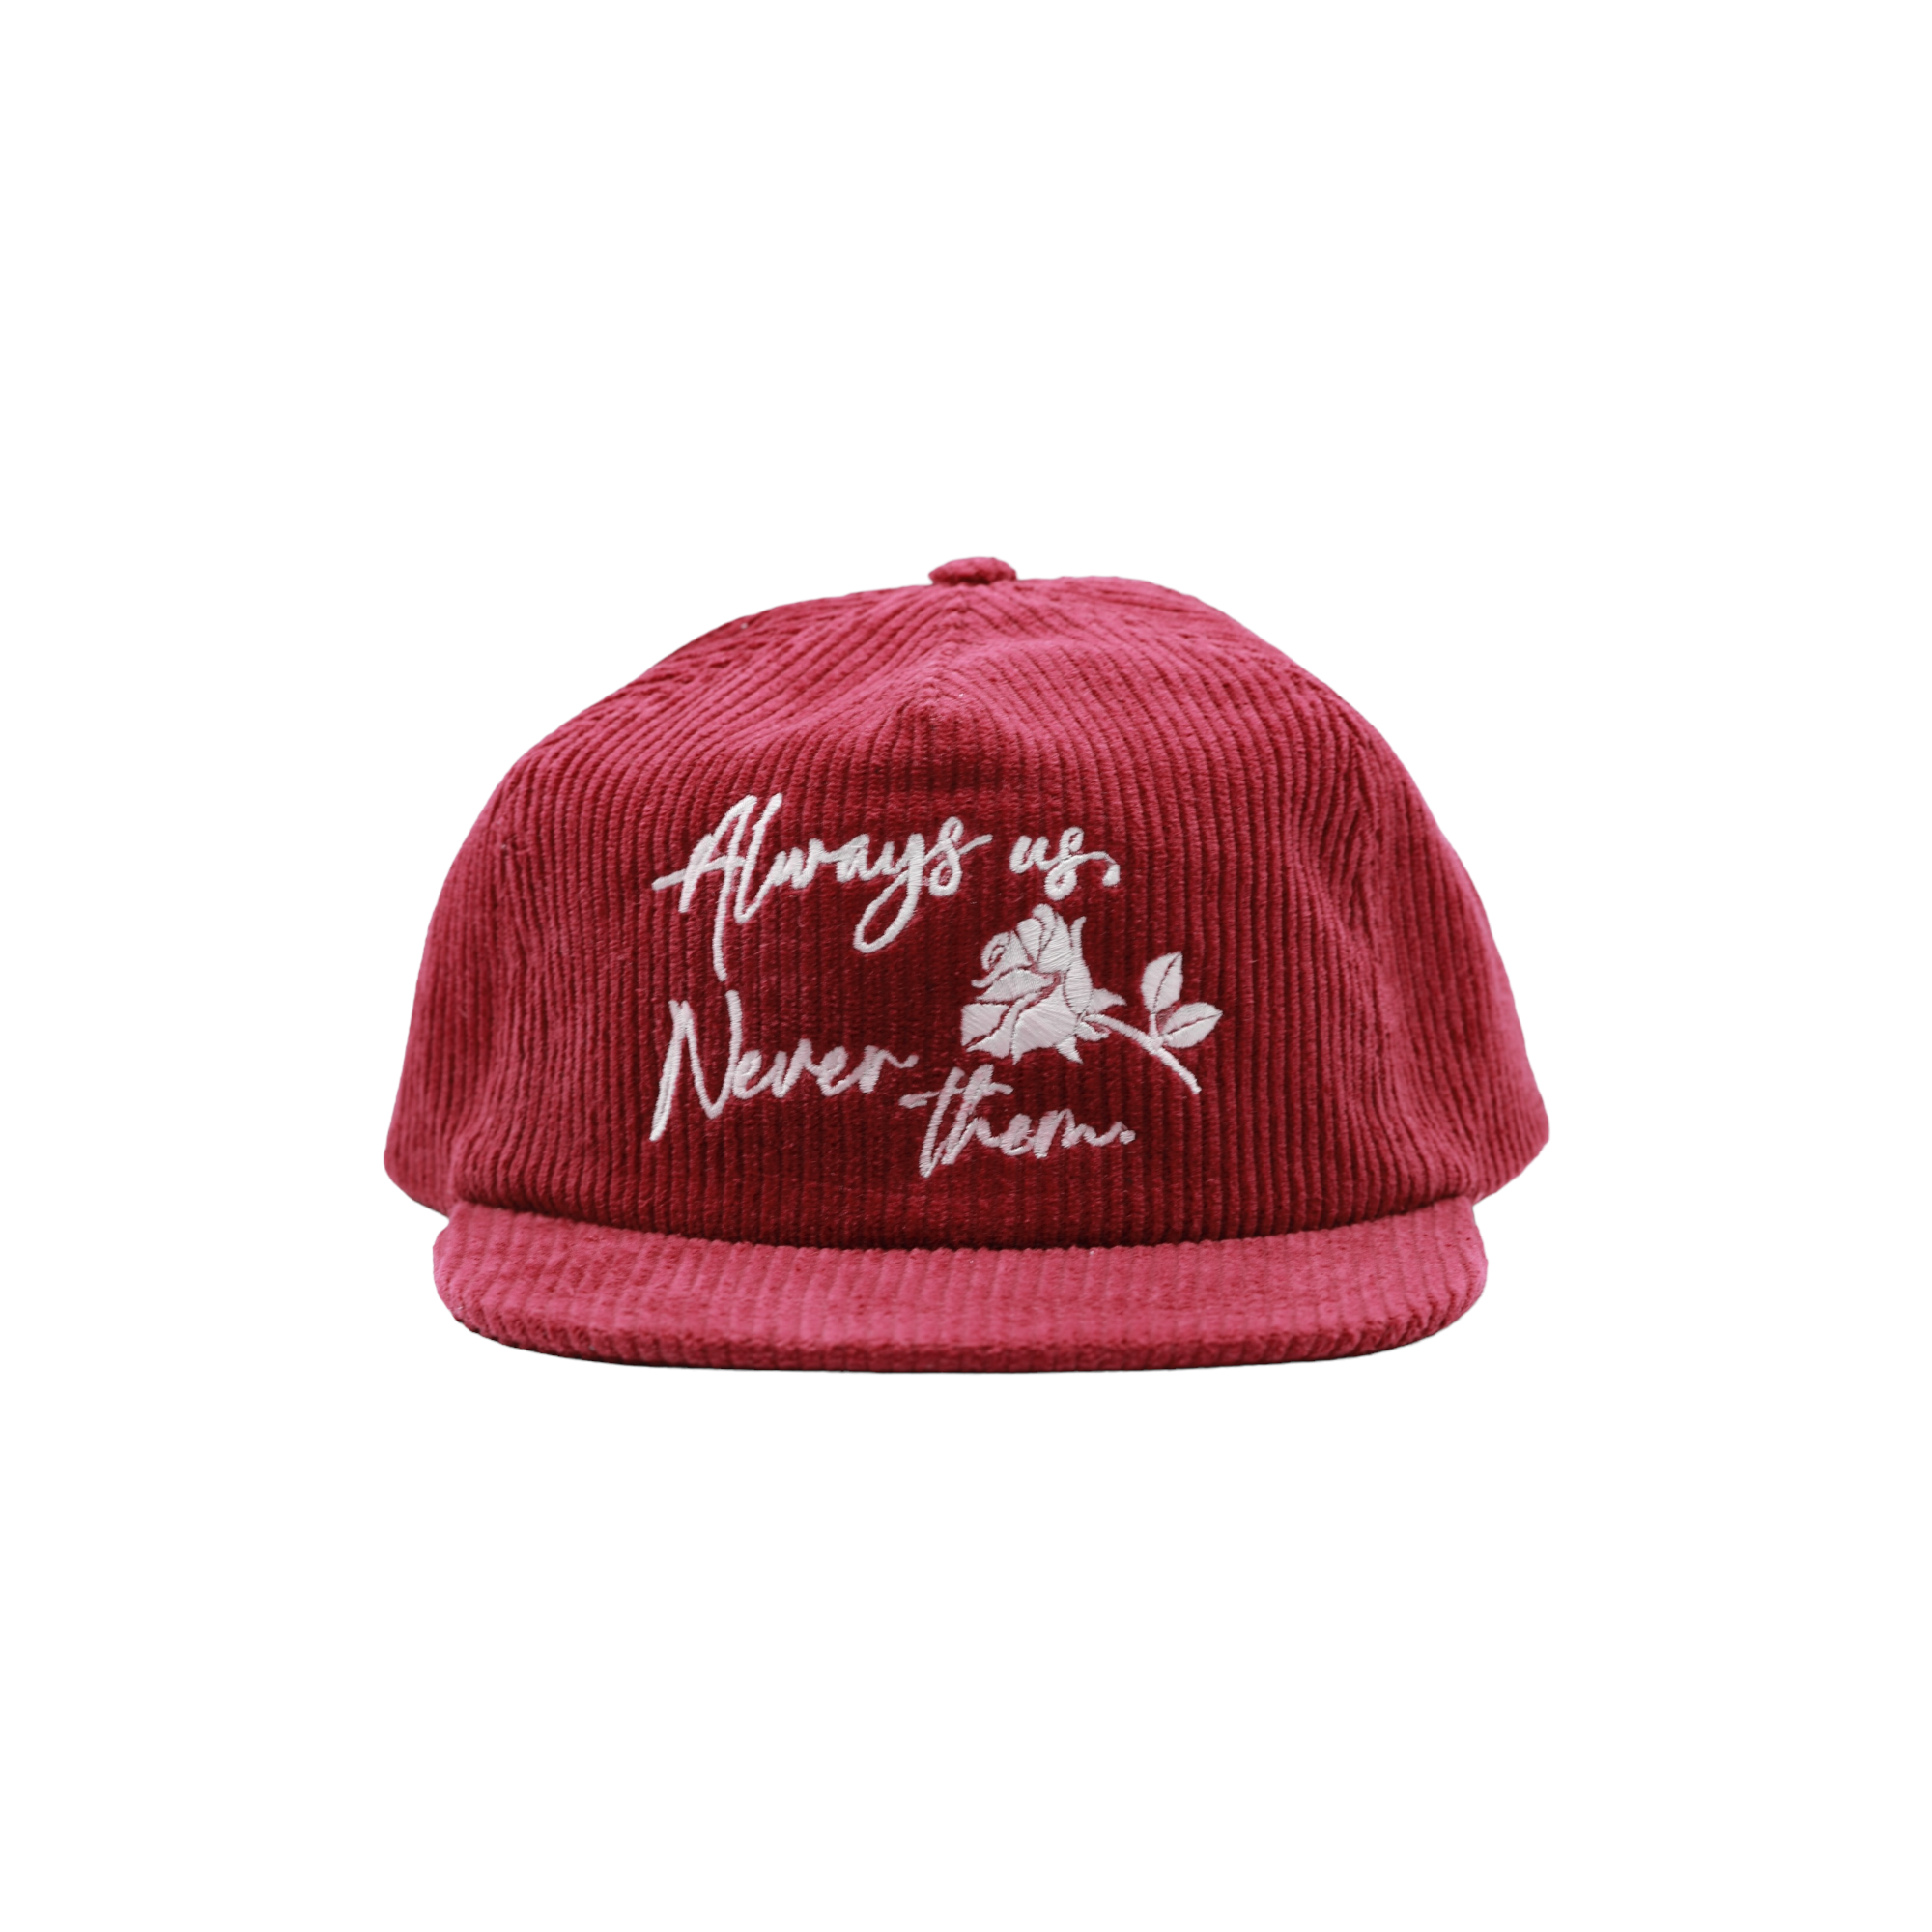 Burgundy Never PericoLimited Always Cap Painters Us, - – Corduroy Them